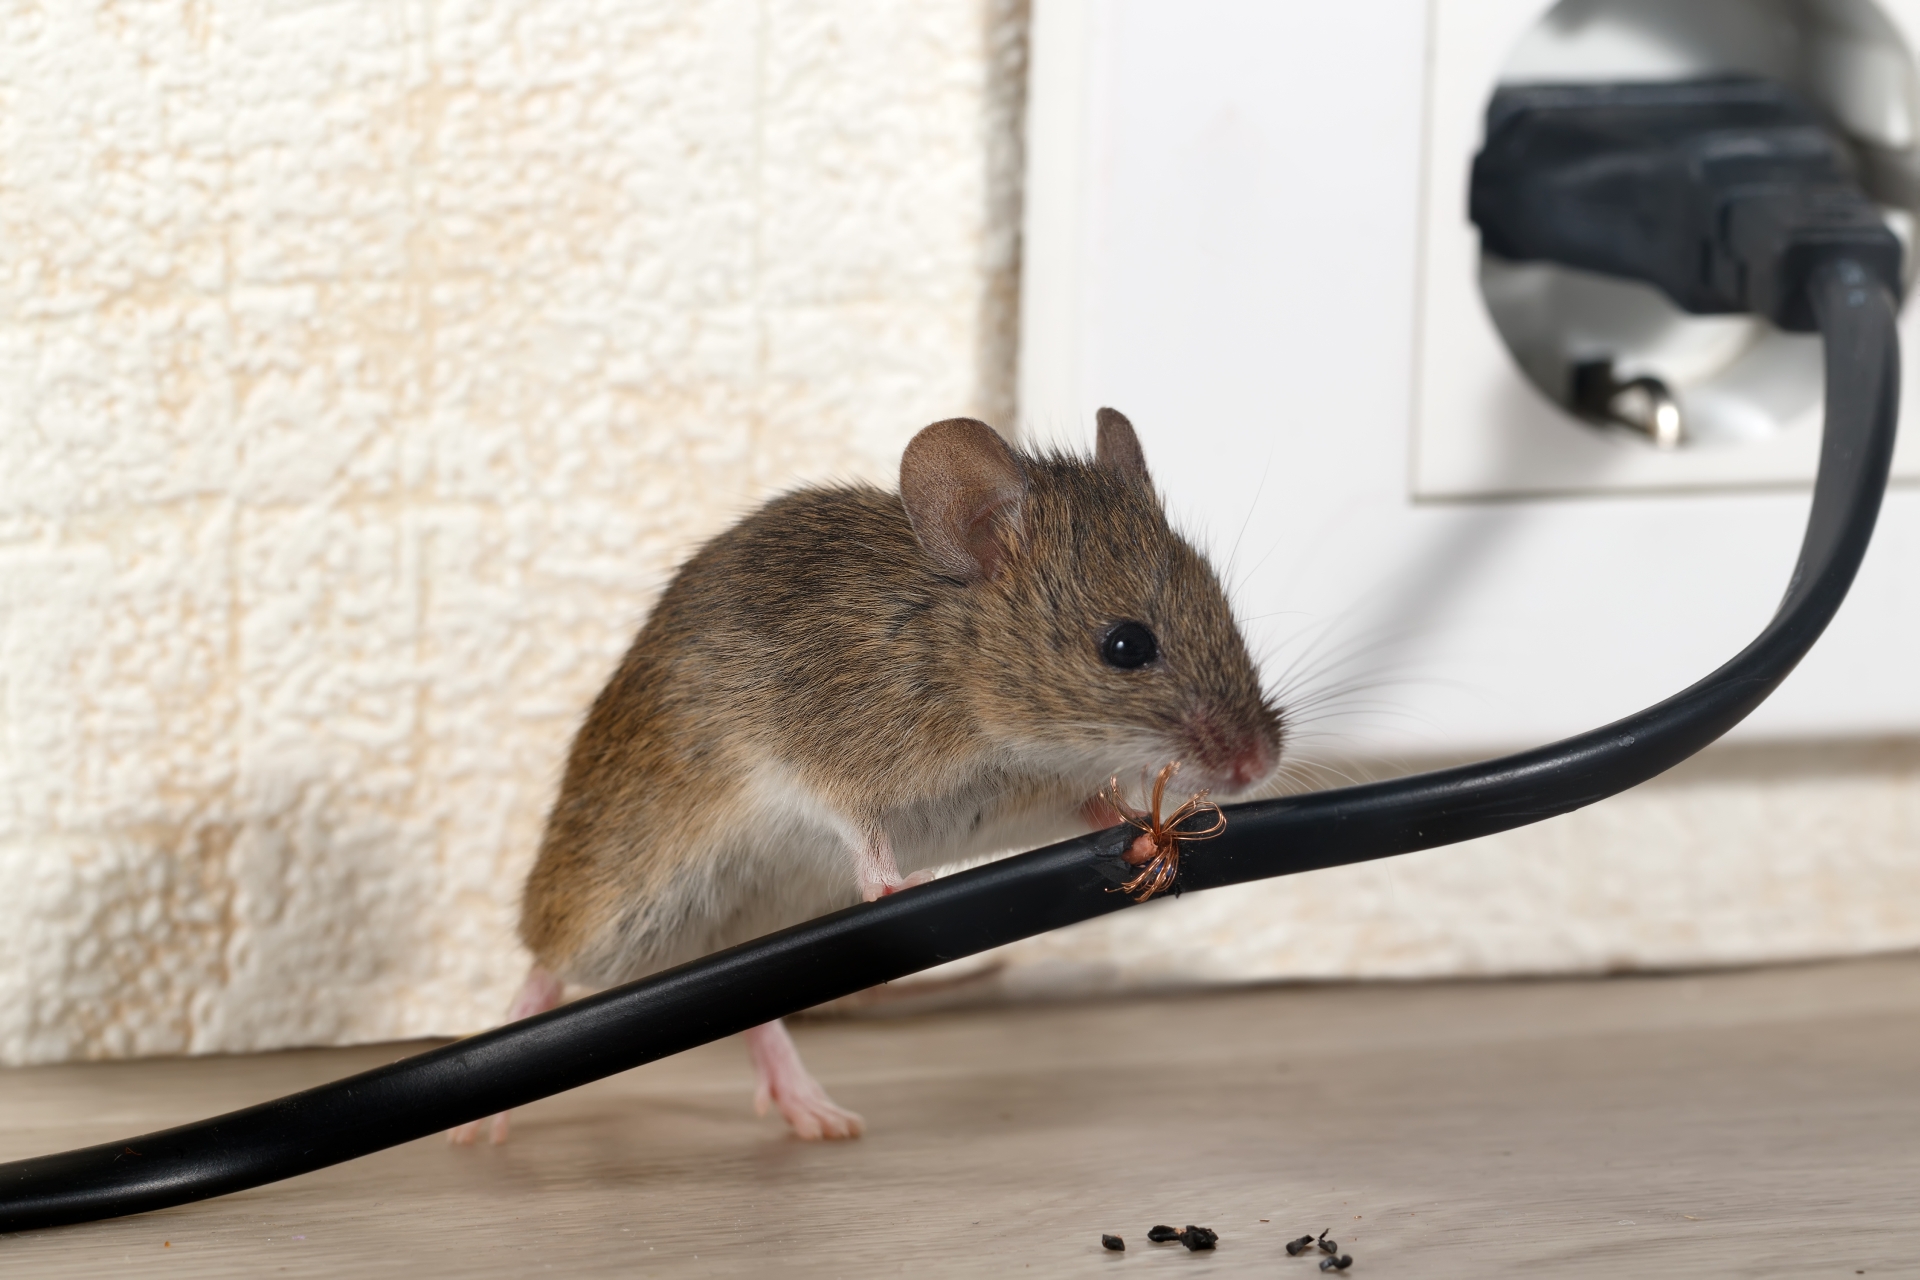 Mice Infestation, Pest Control in Hounslow West, Hounslow Heath, Cranford, TW4. Call Now 020 8166 9746